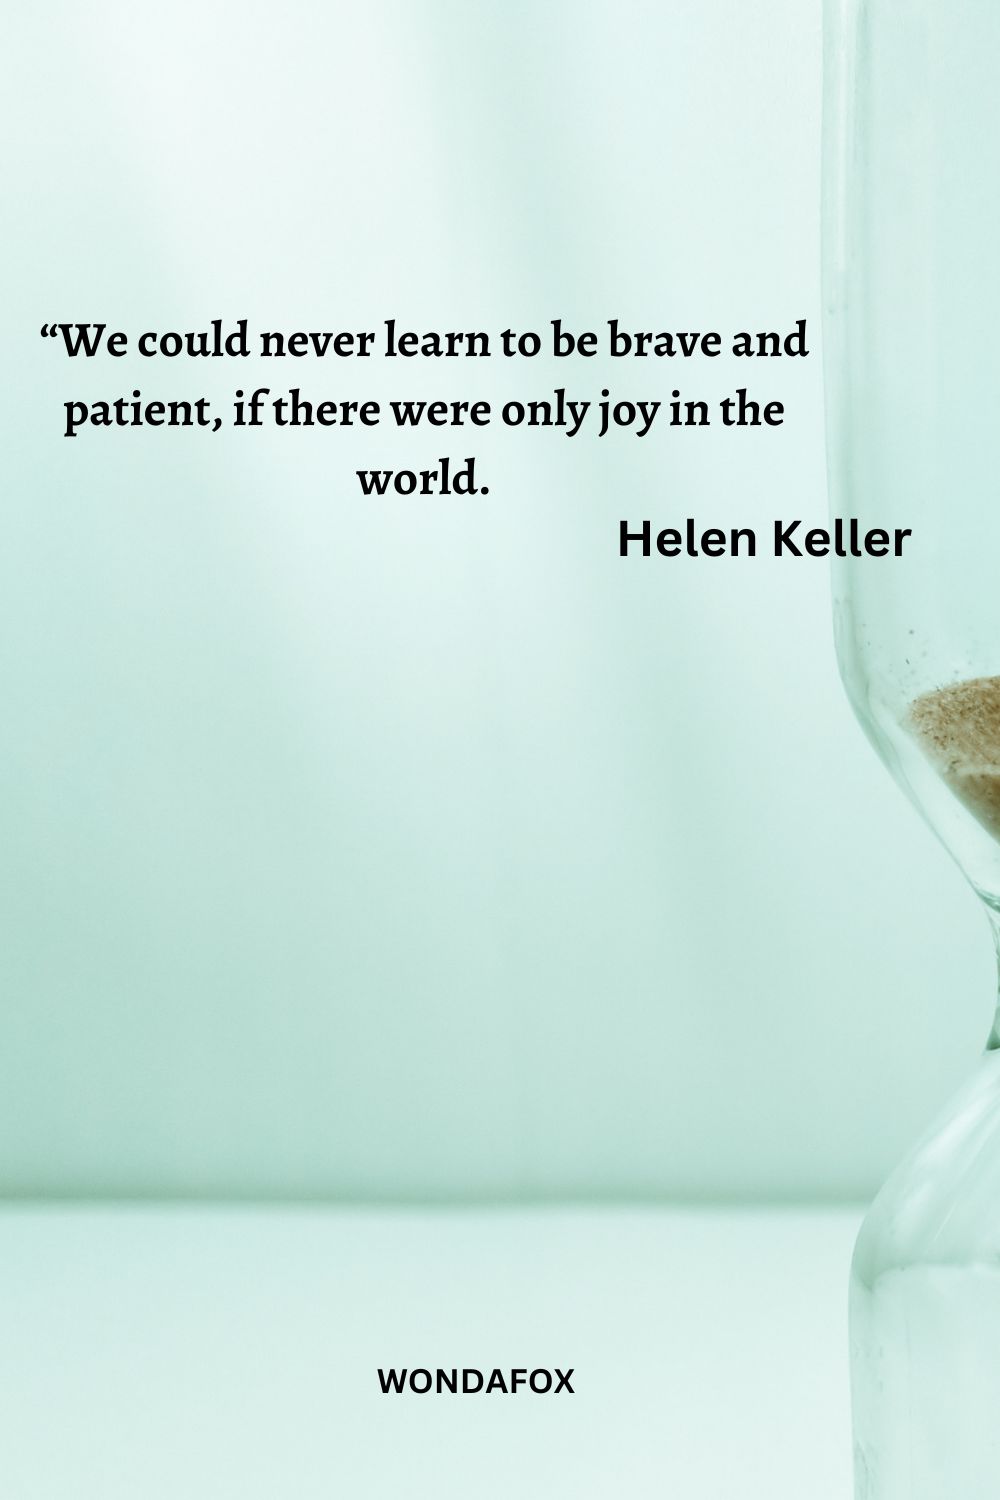 “We could never learn to be brave and patient, if there were only joy in the world.
Helen Keller